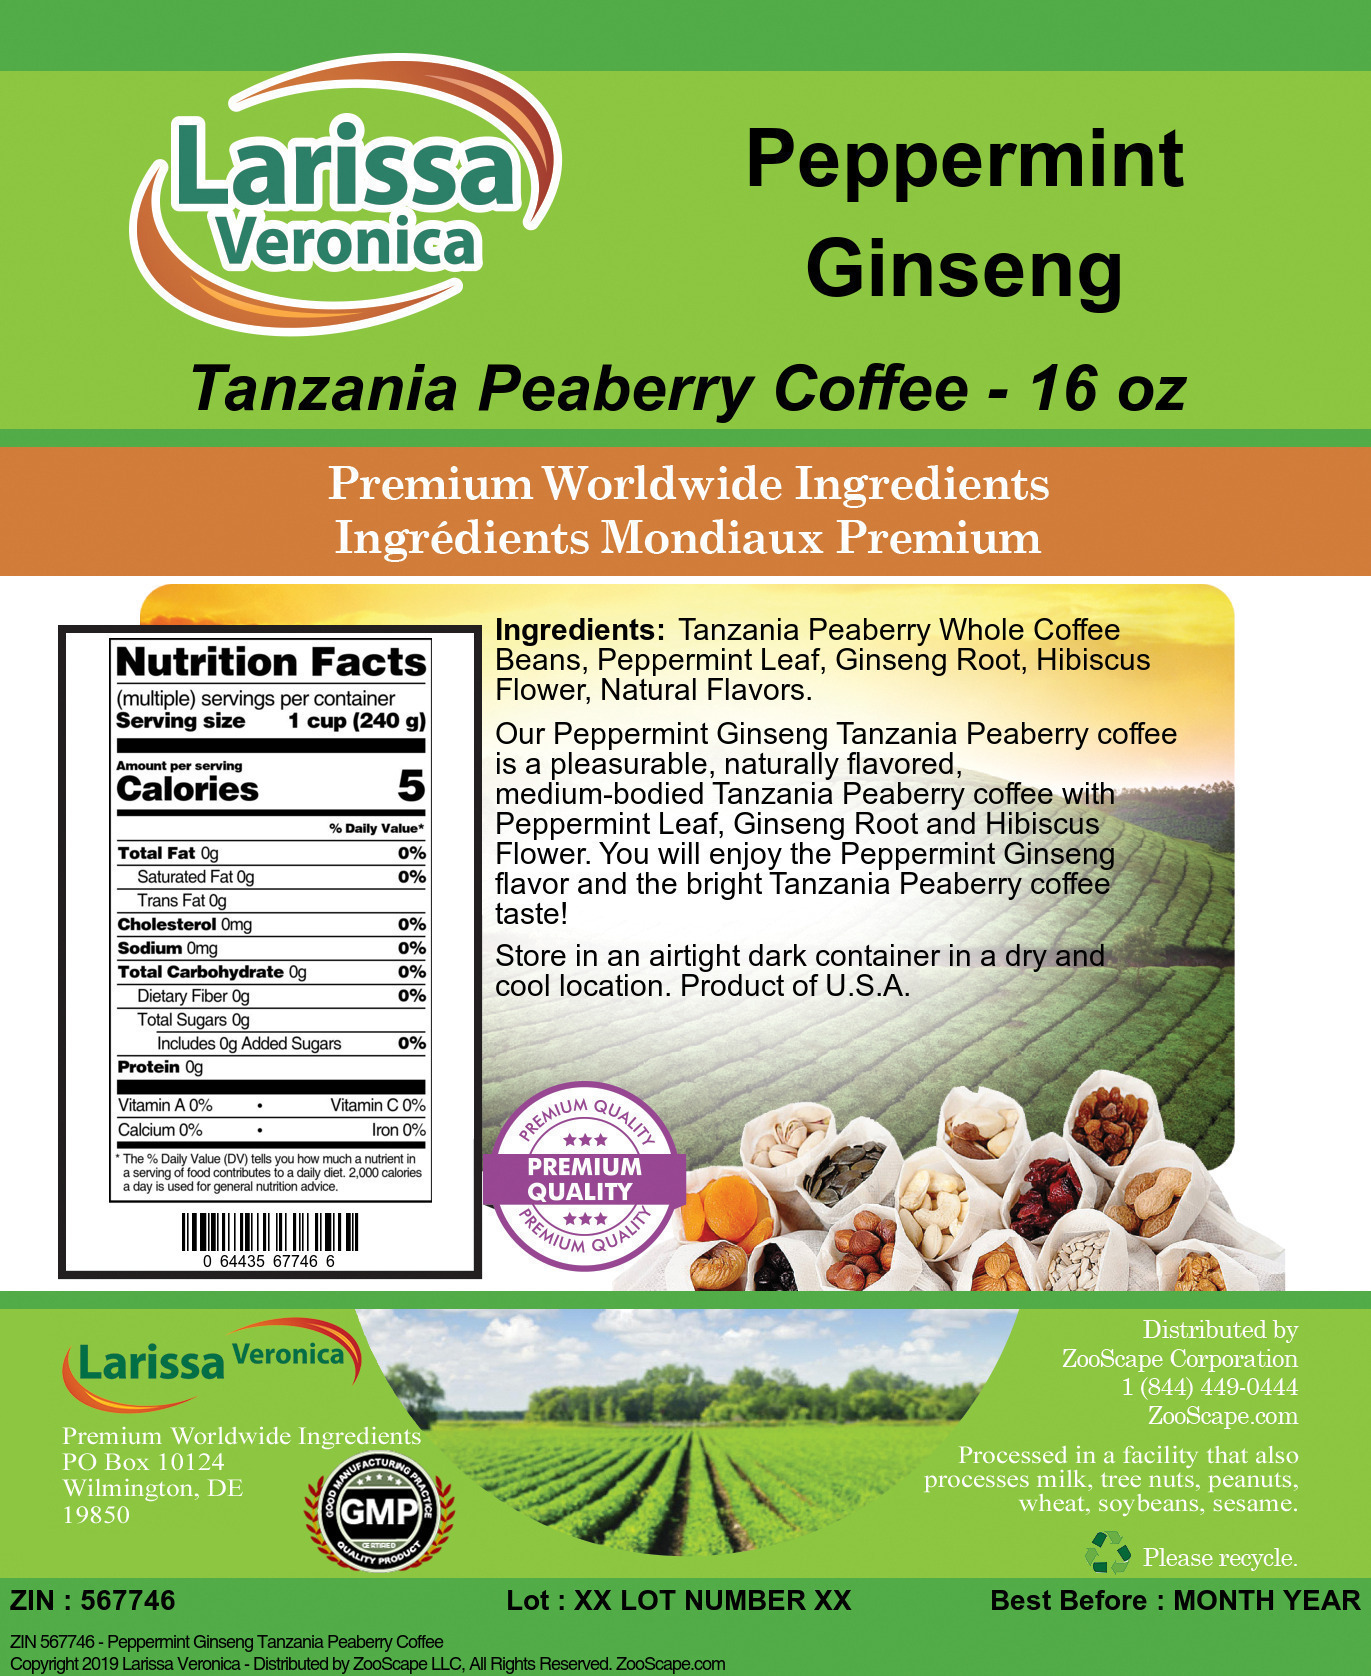 Peppermint Ginseng Tanzania Peaberry Coffee - Label